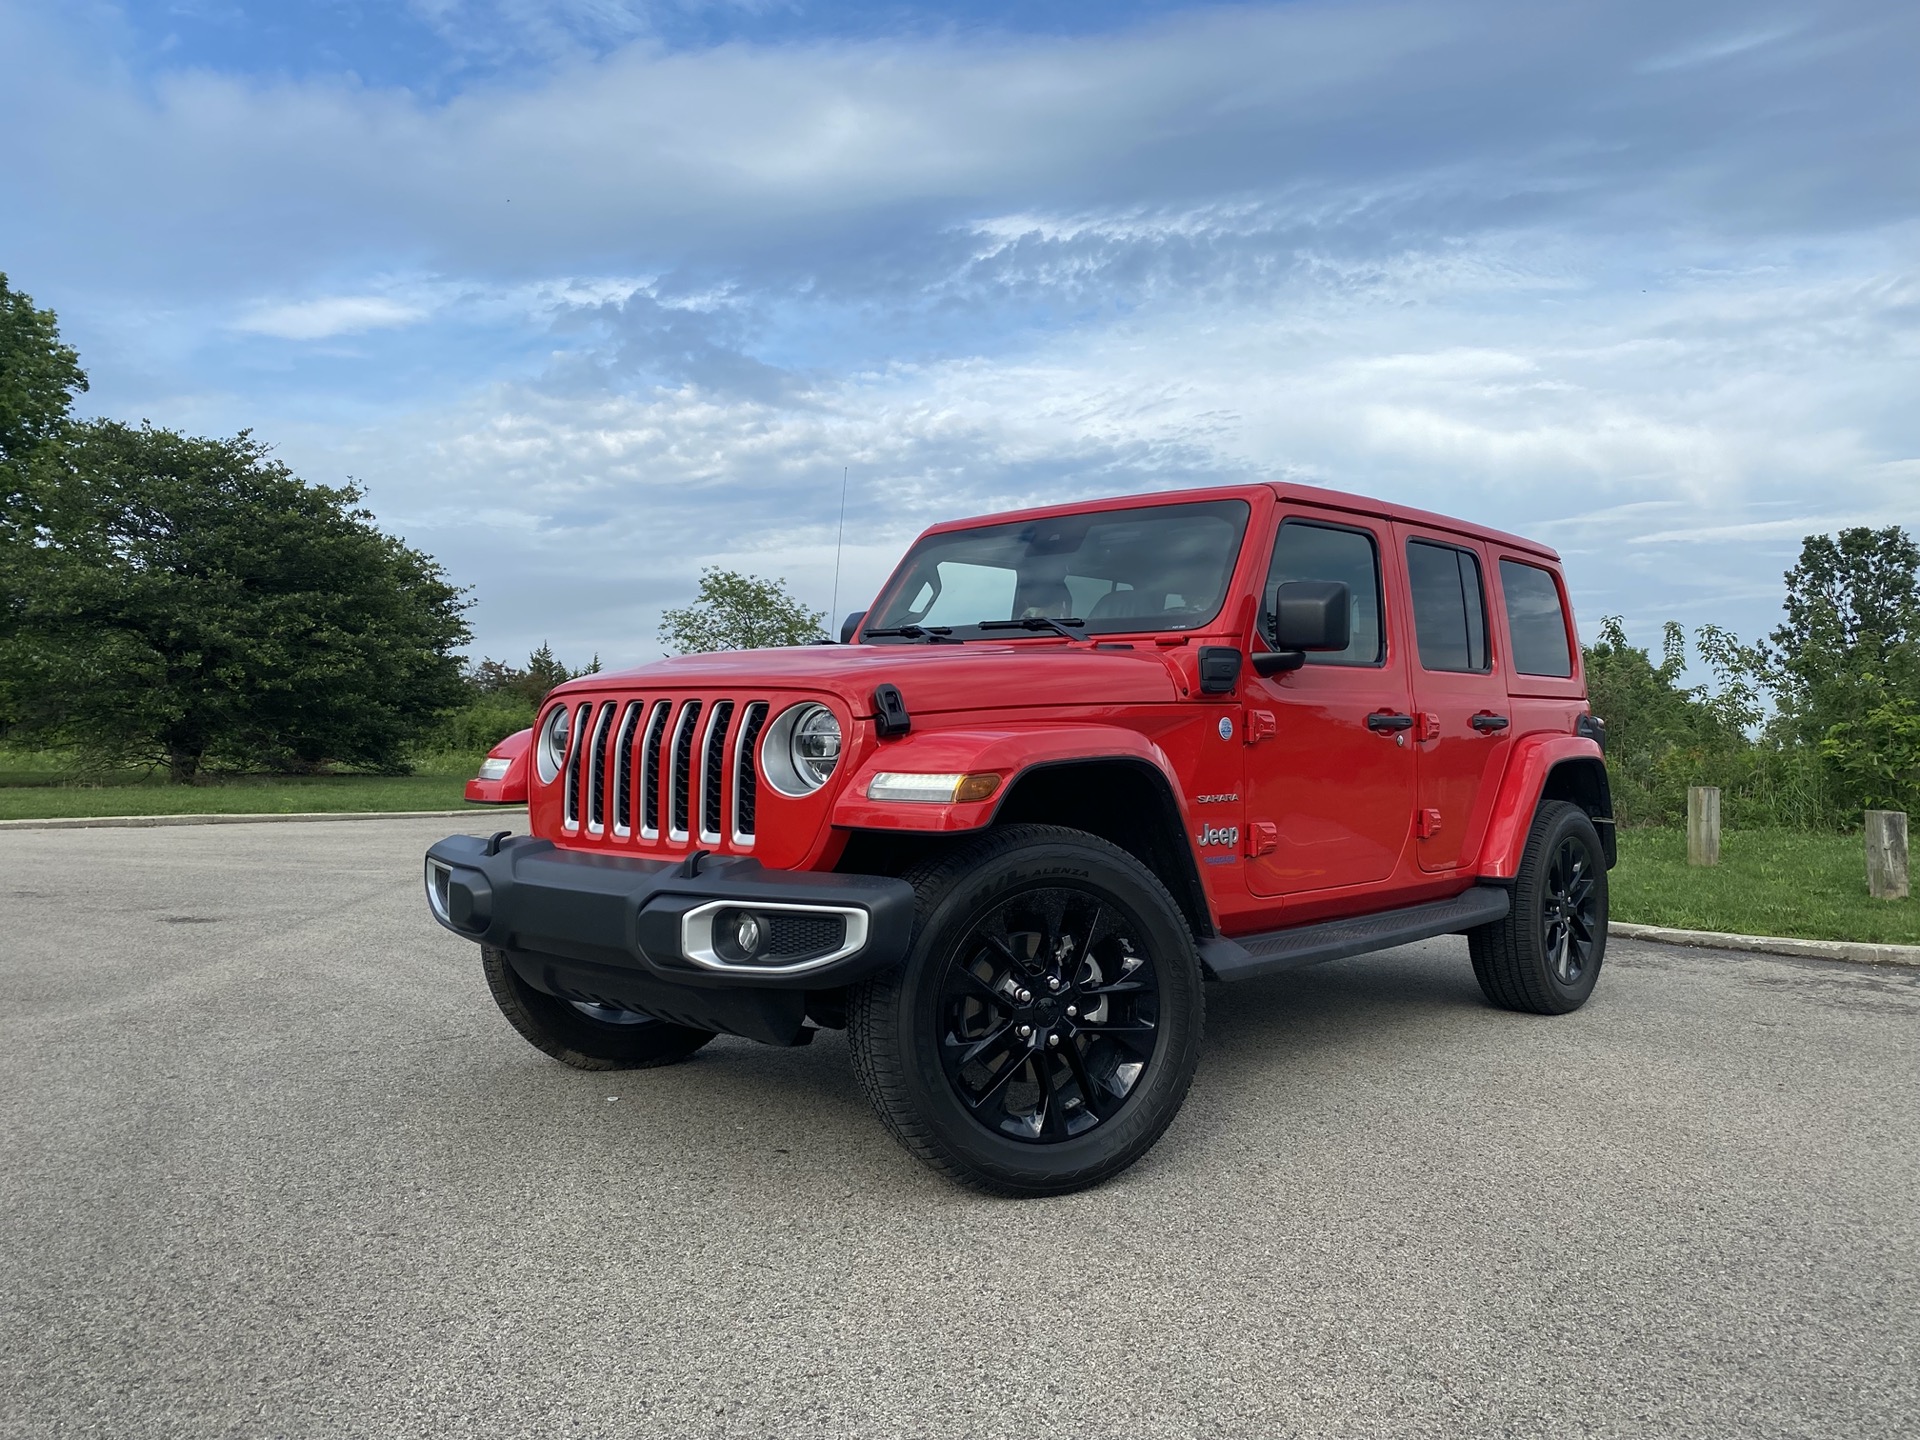 First drive: 2021 Jeep Wrangler 4xe hybrid plugs into a greener, cleaner  great outdoors